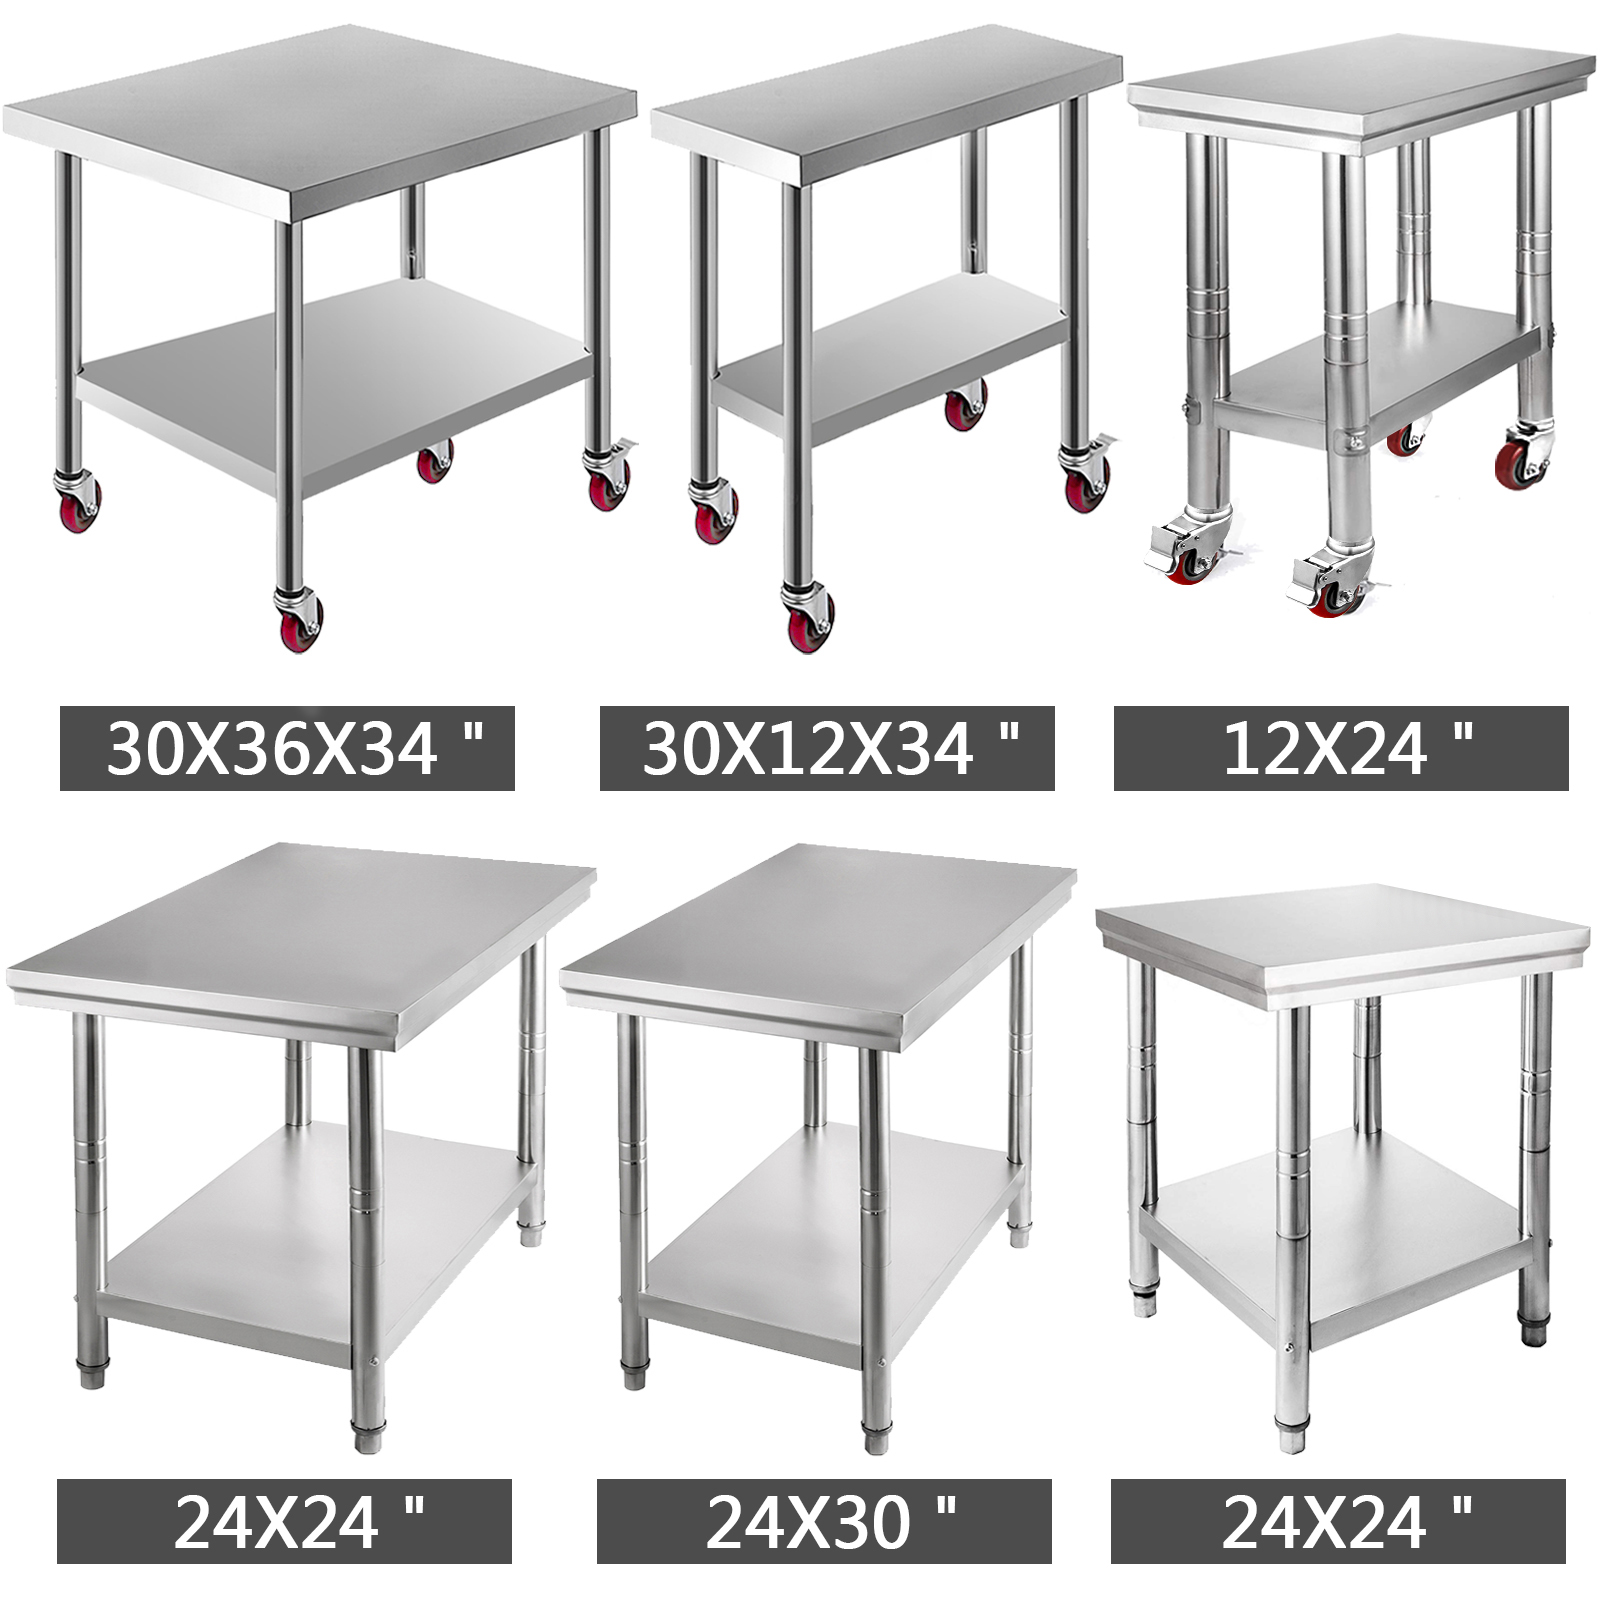 Work Prep Table,Stainless Steel,2 Layers